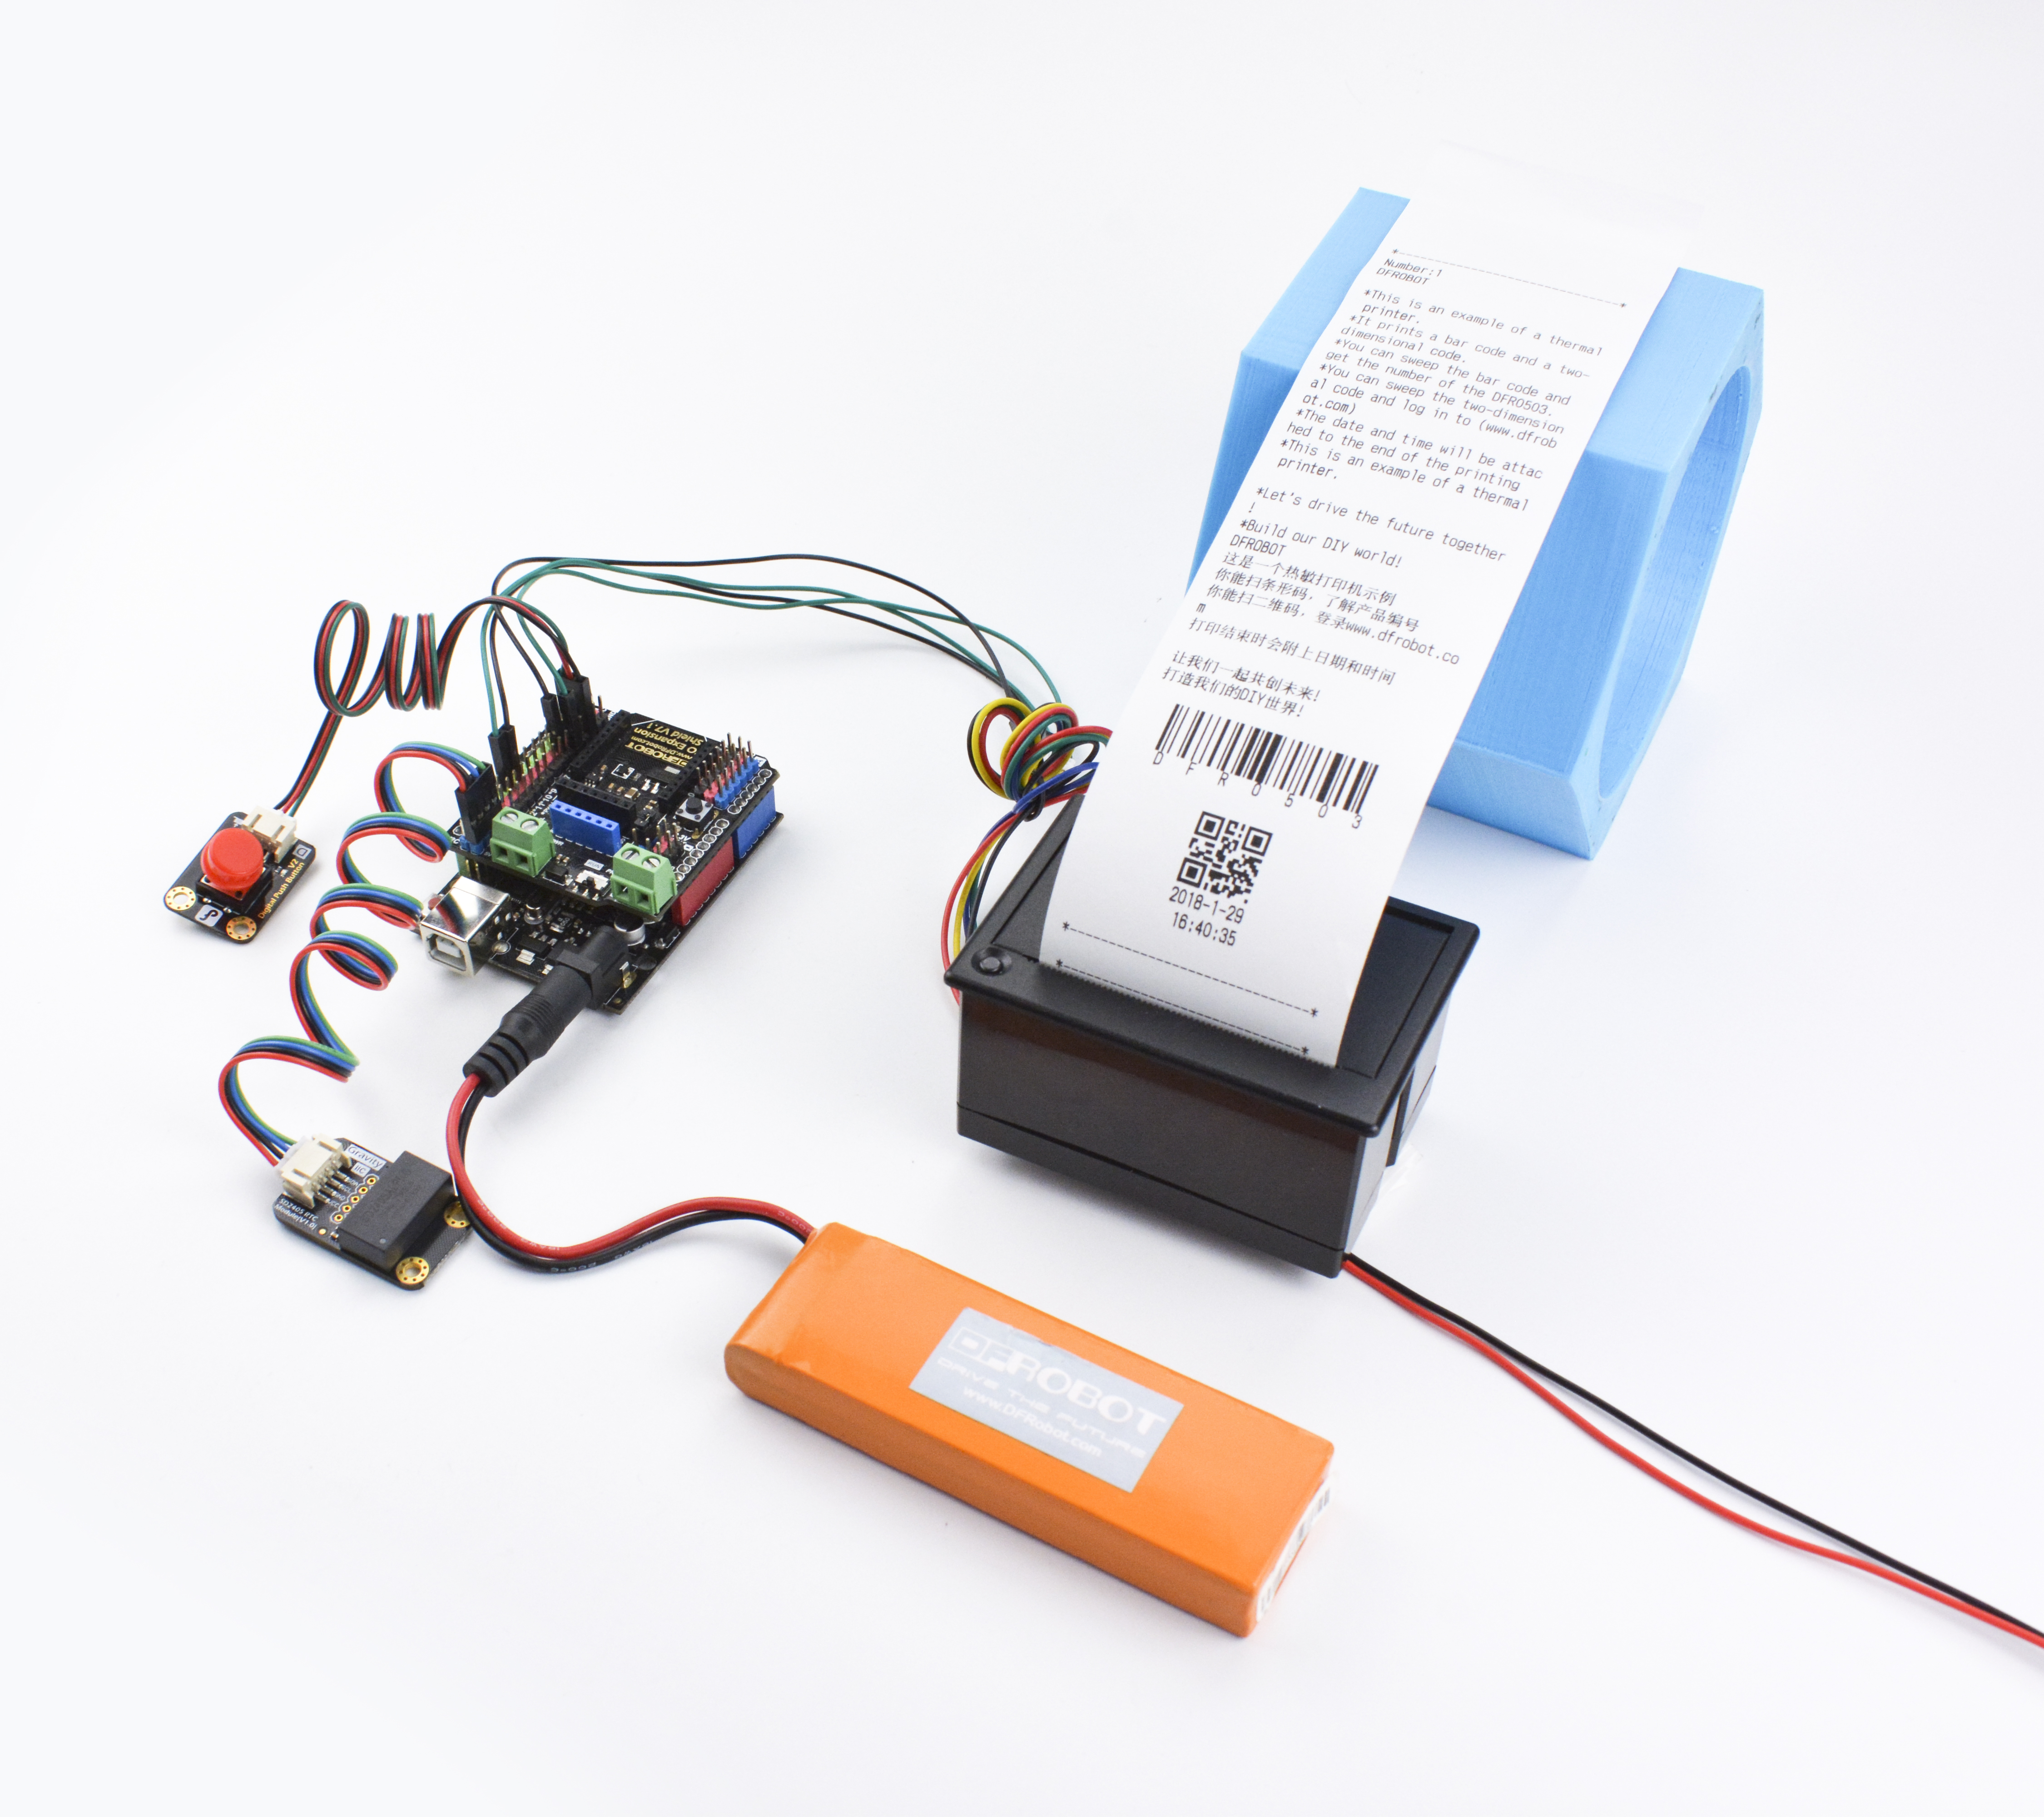 Embedded Thermal Printer - TTL Serial Connection Diagram